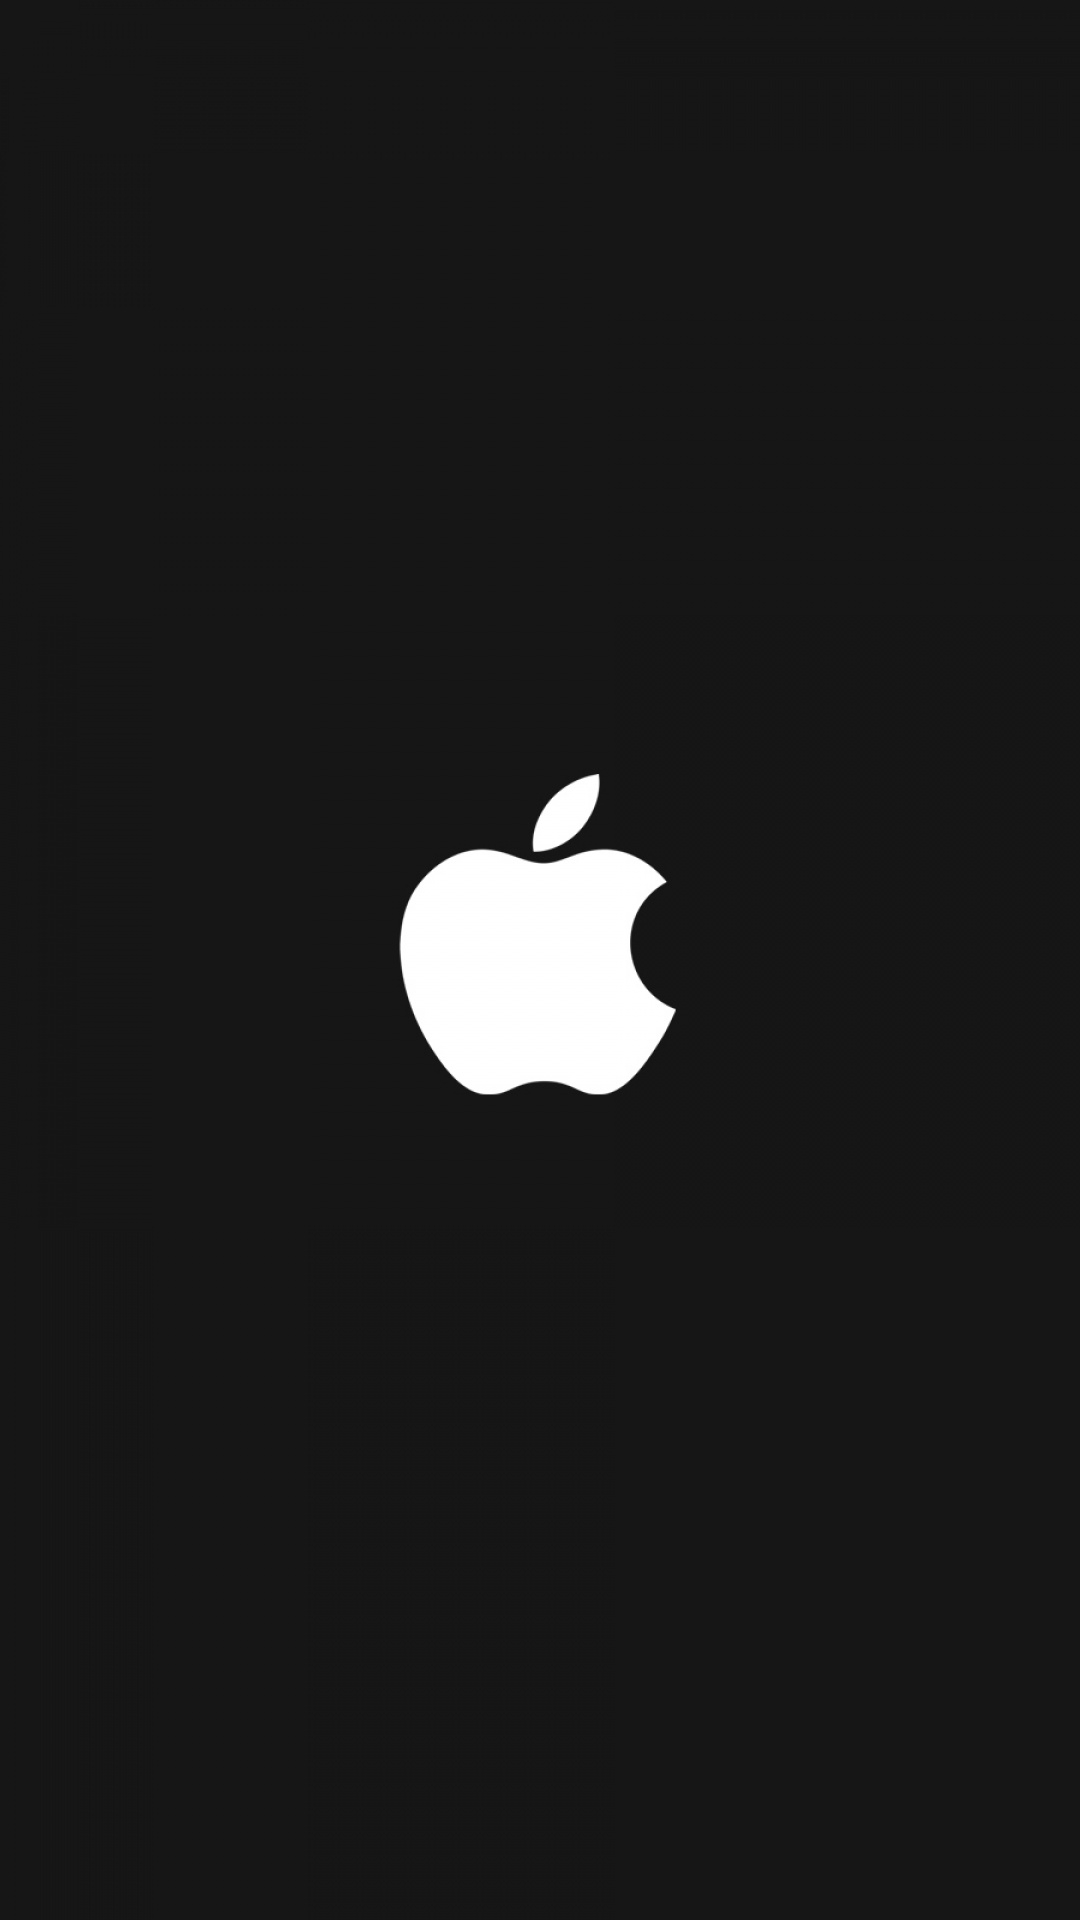 Apple Logo Black And White Iphone Wallpapers